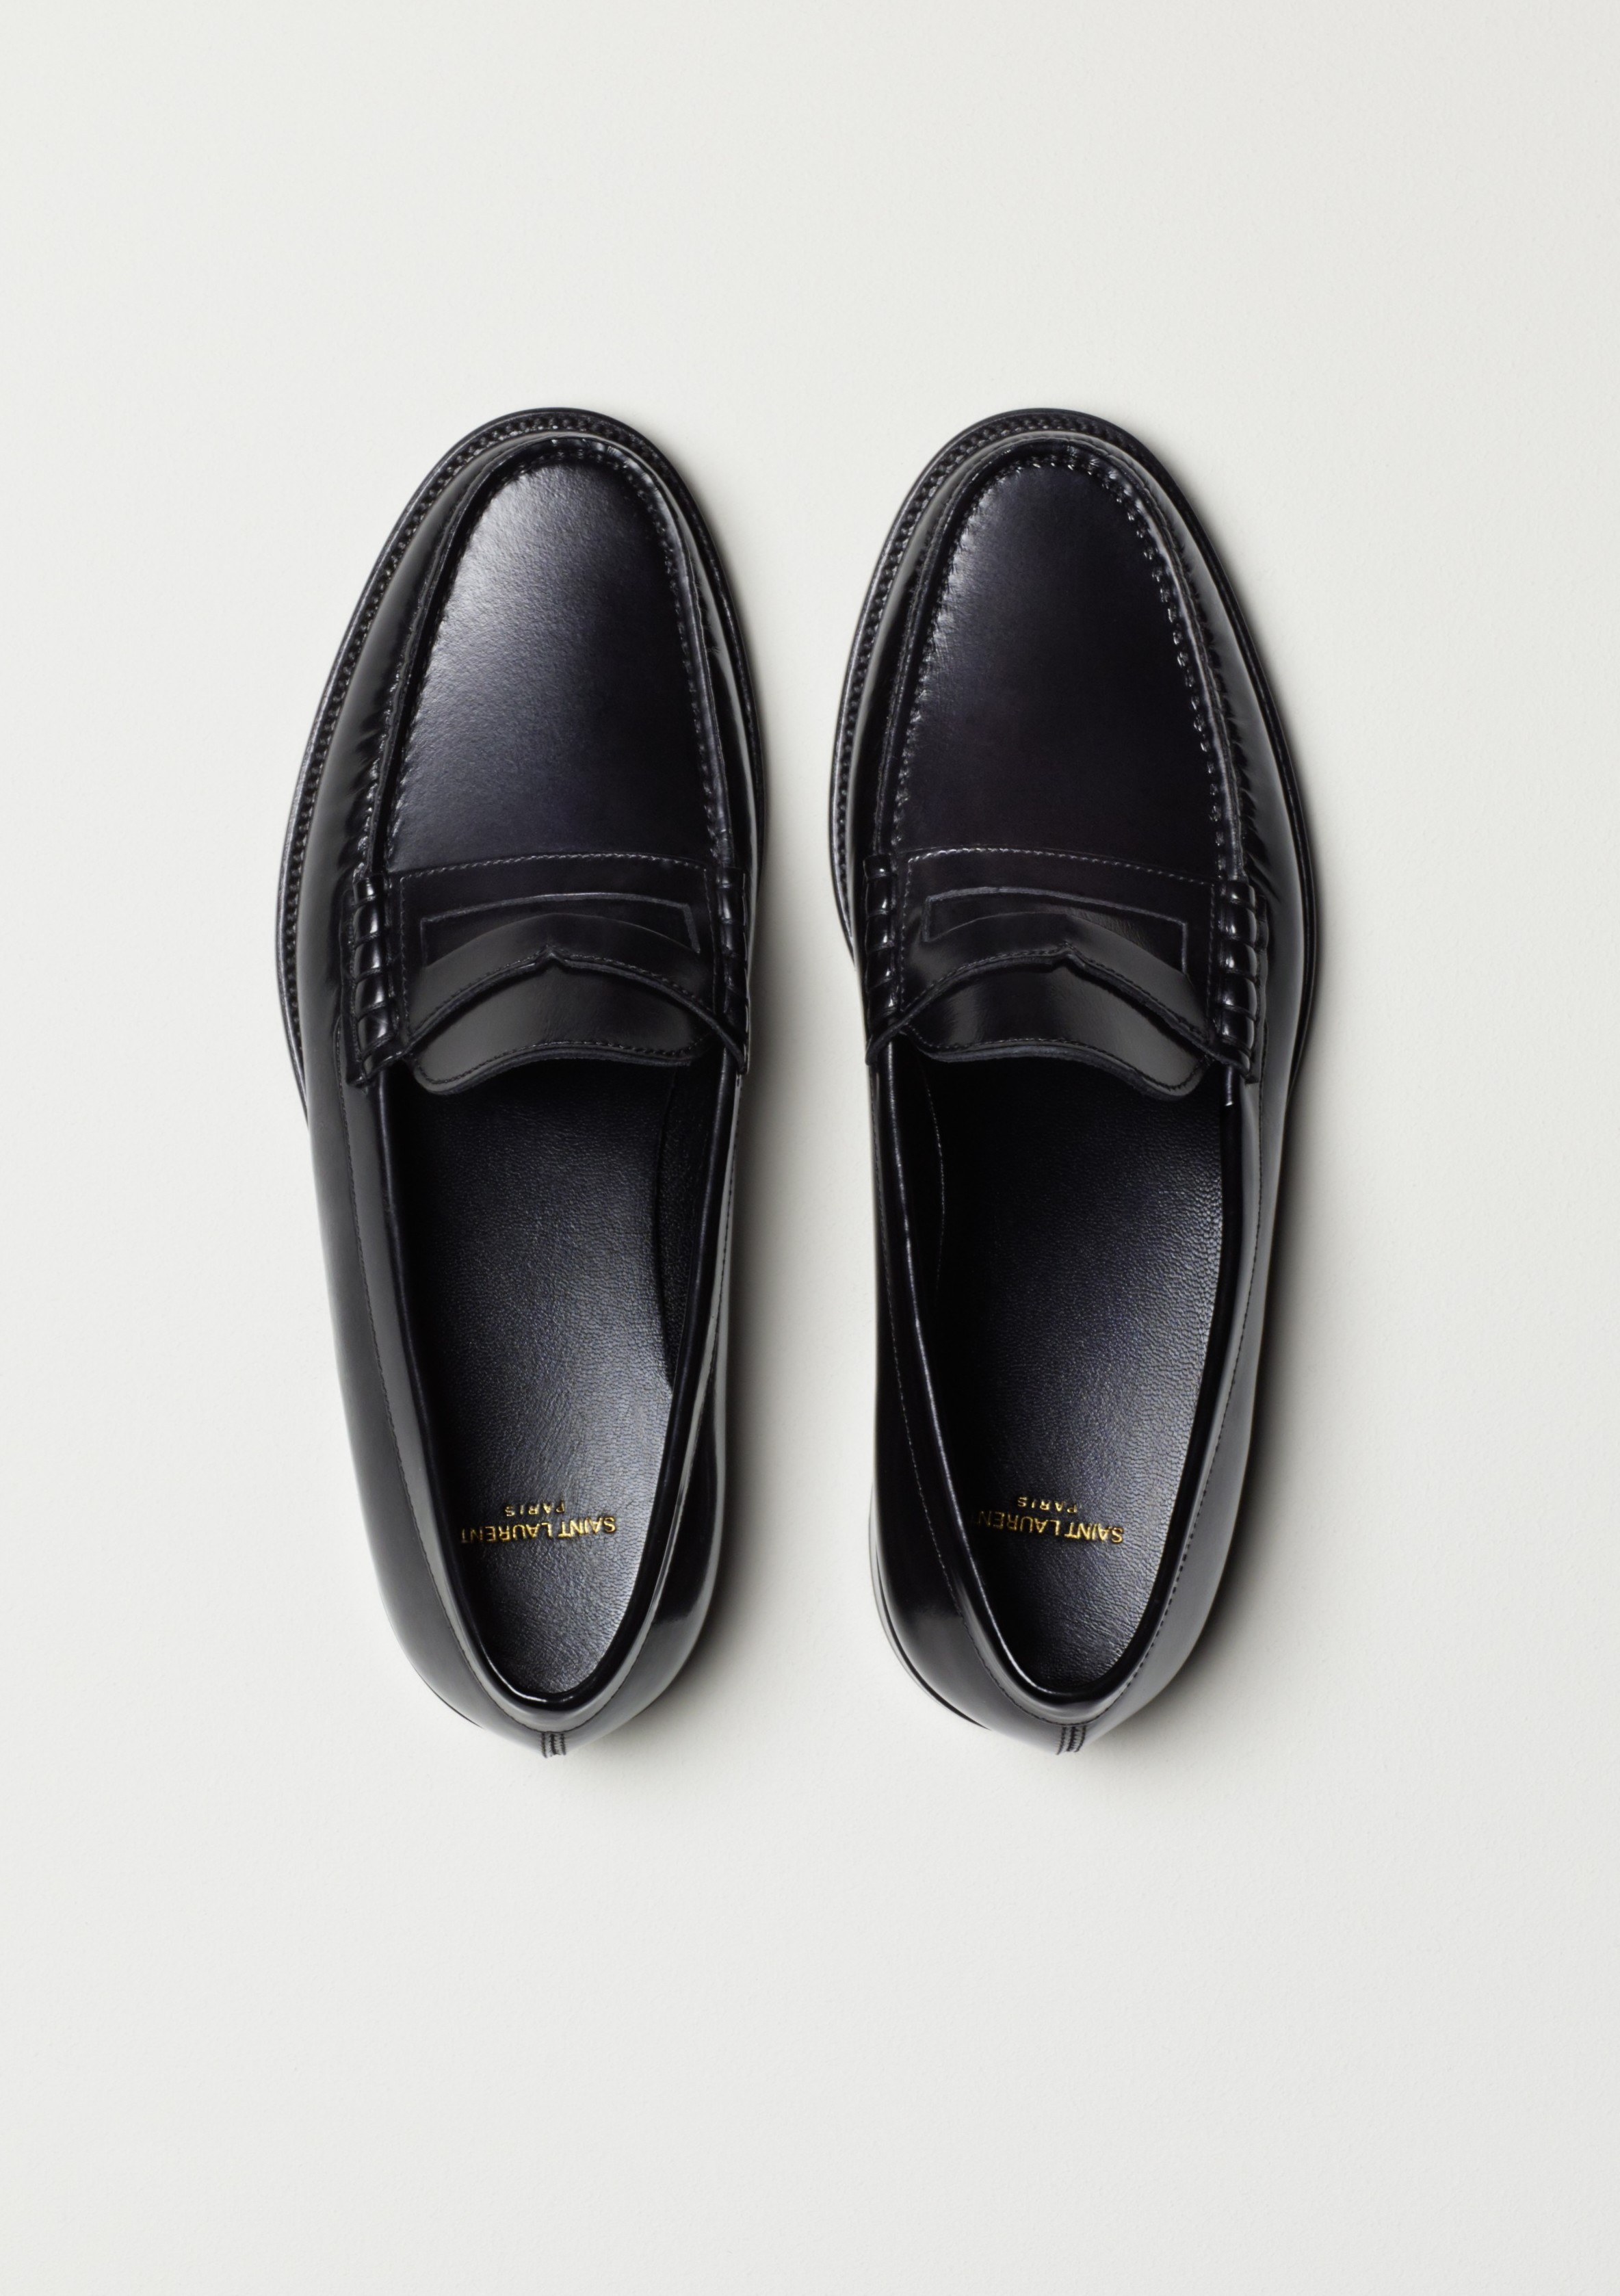 The Worlds Best Shoes - With Mr Porter